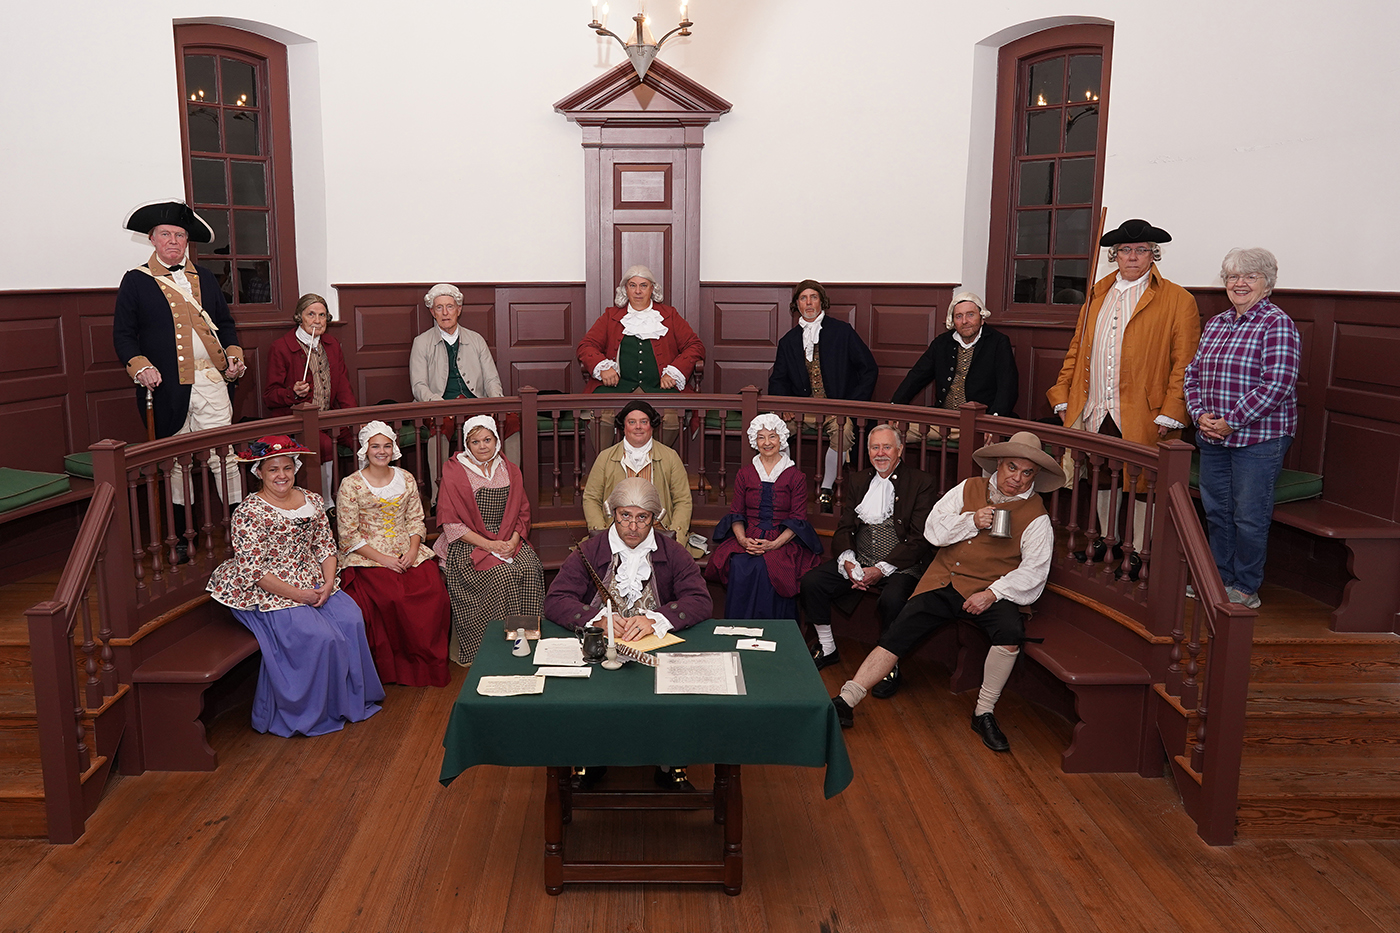 Court Day Drama at the 1750 Isle of Wight Courthouse